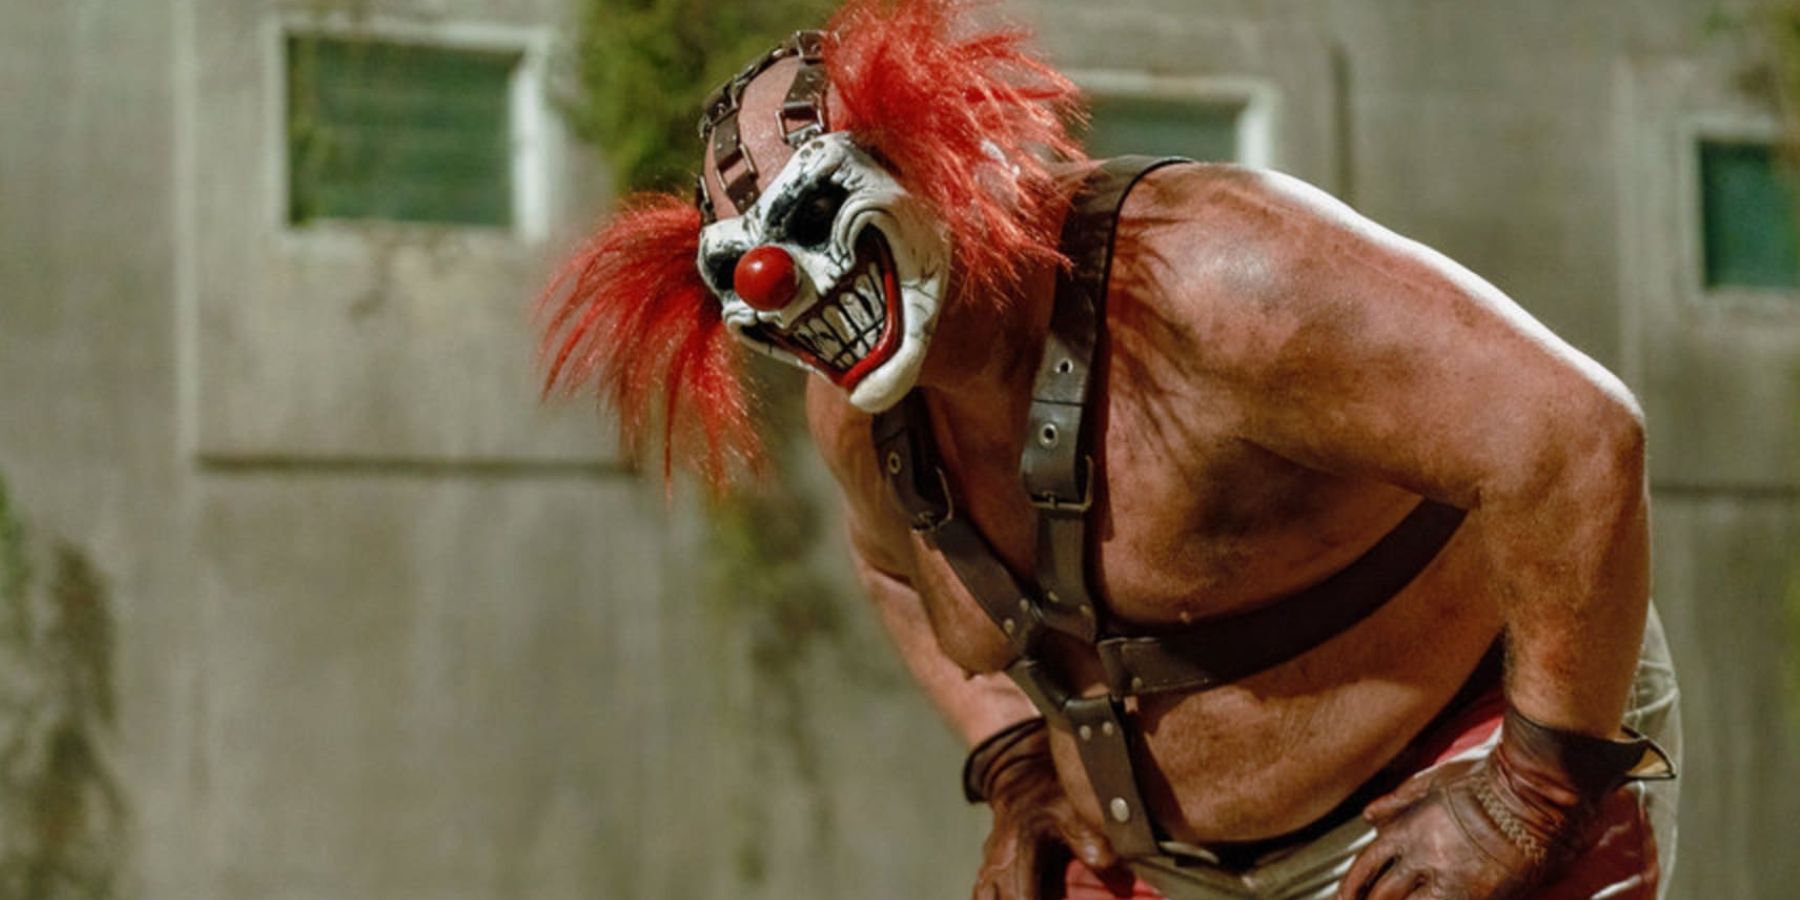 Sweet Tooth hunched over in Twisted Metal TV show